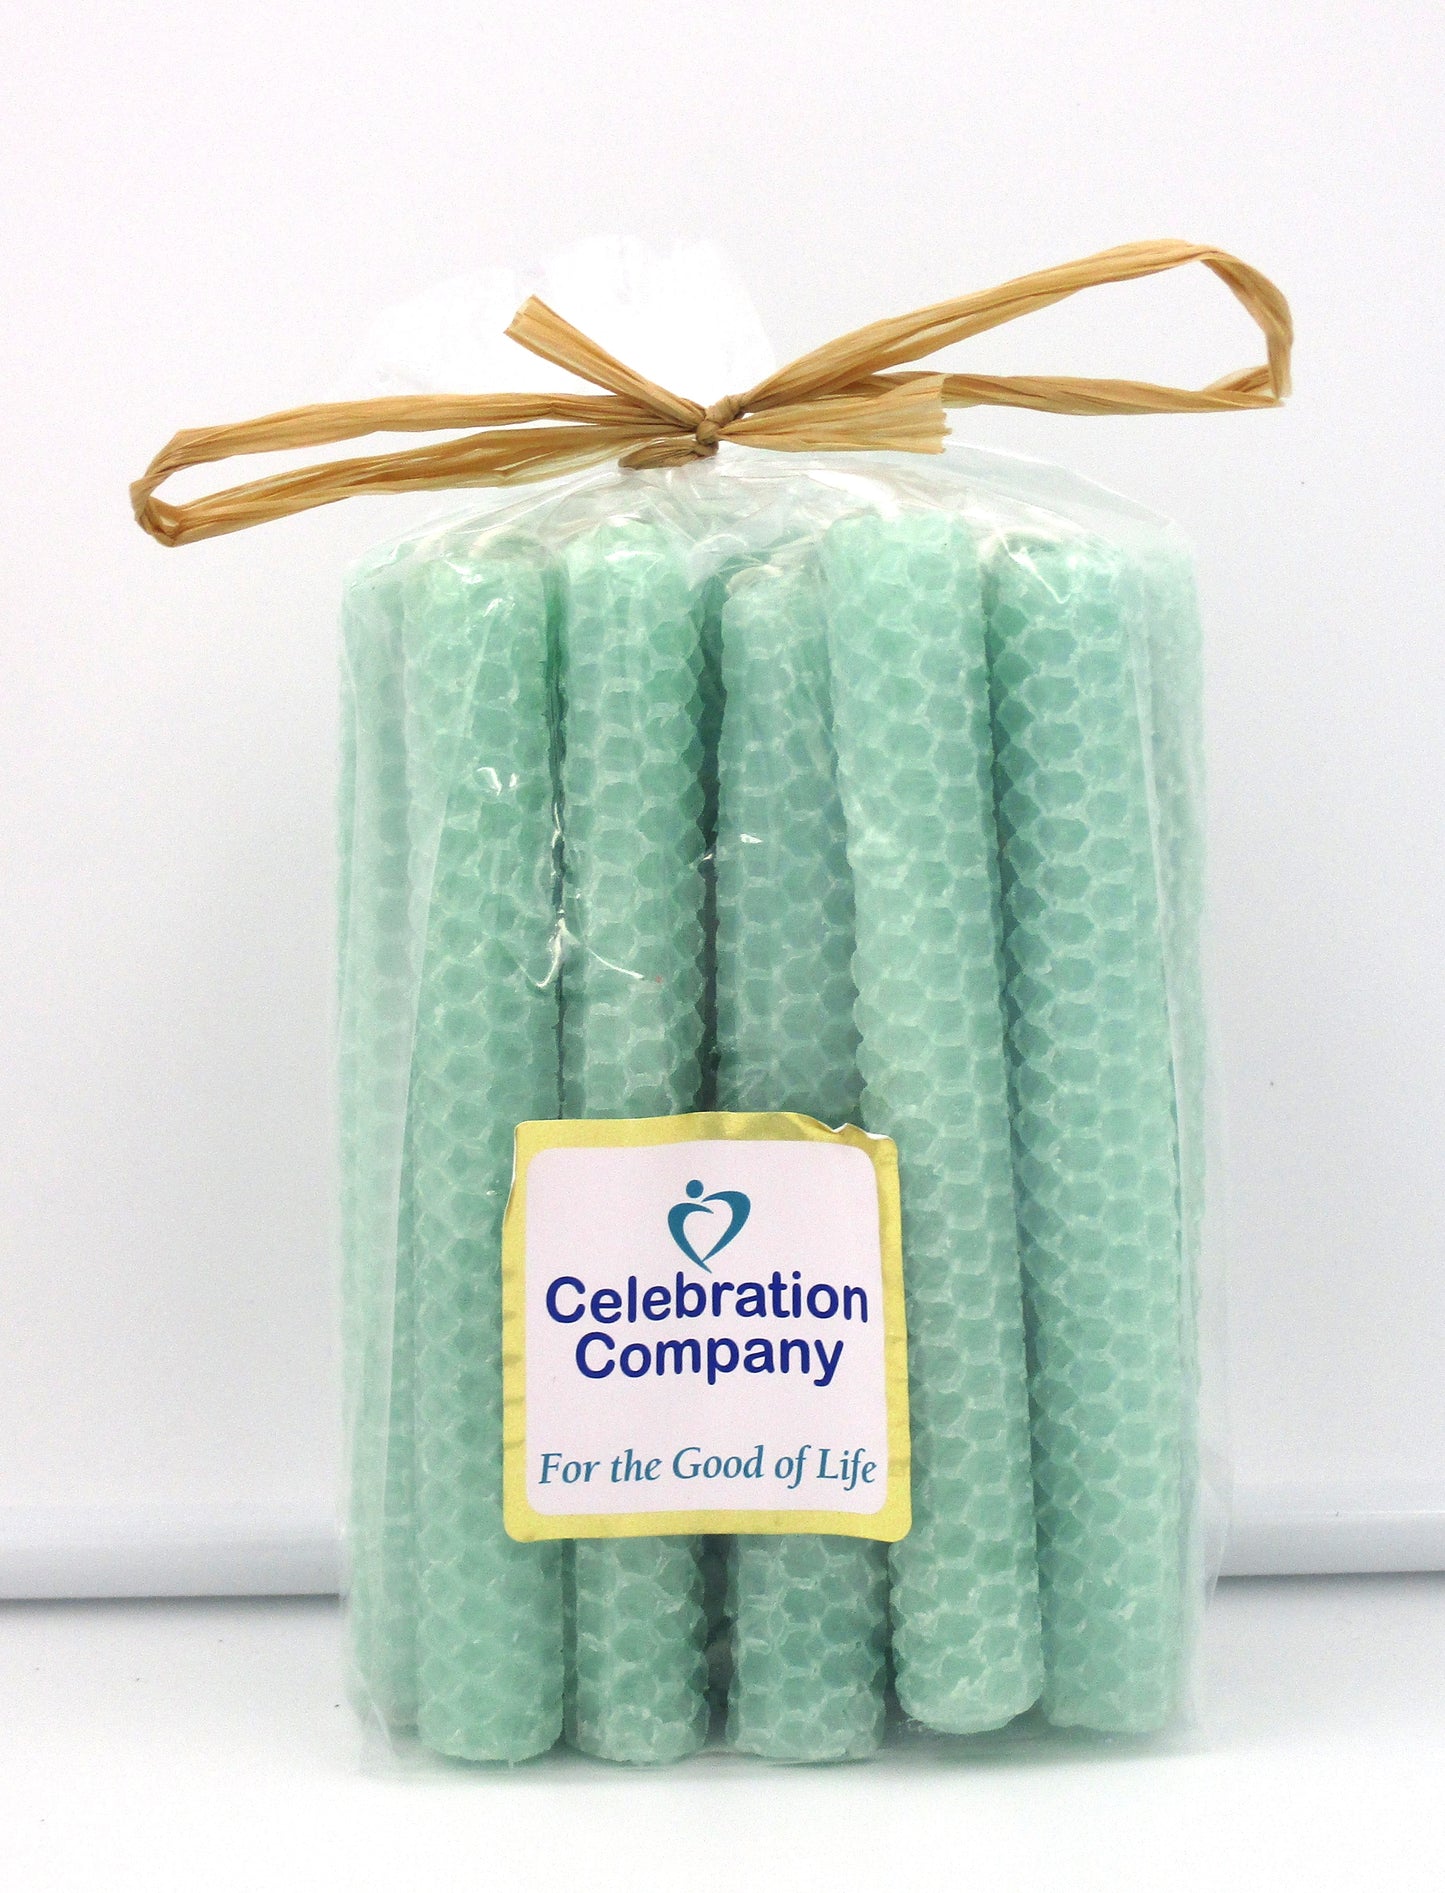 Package of 16 Light Blue Shabbat candles in clear package with top tied off.